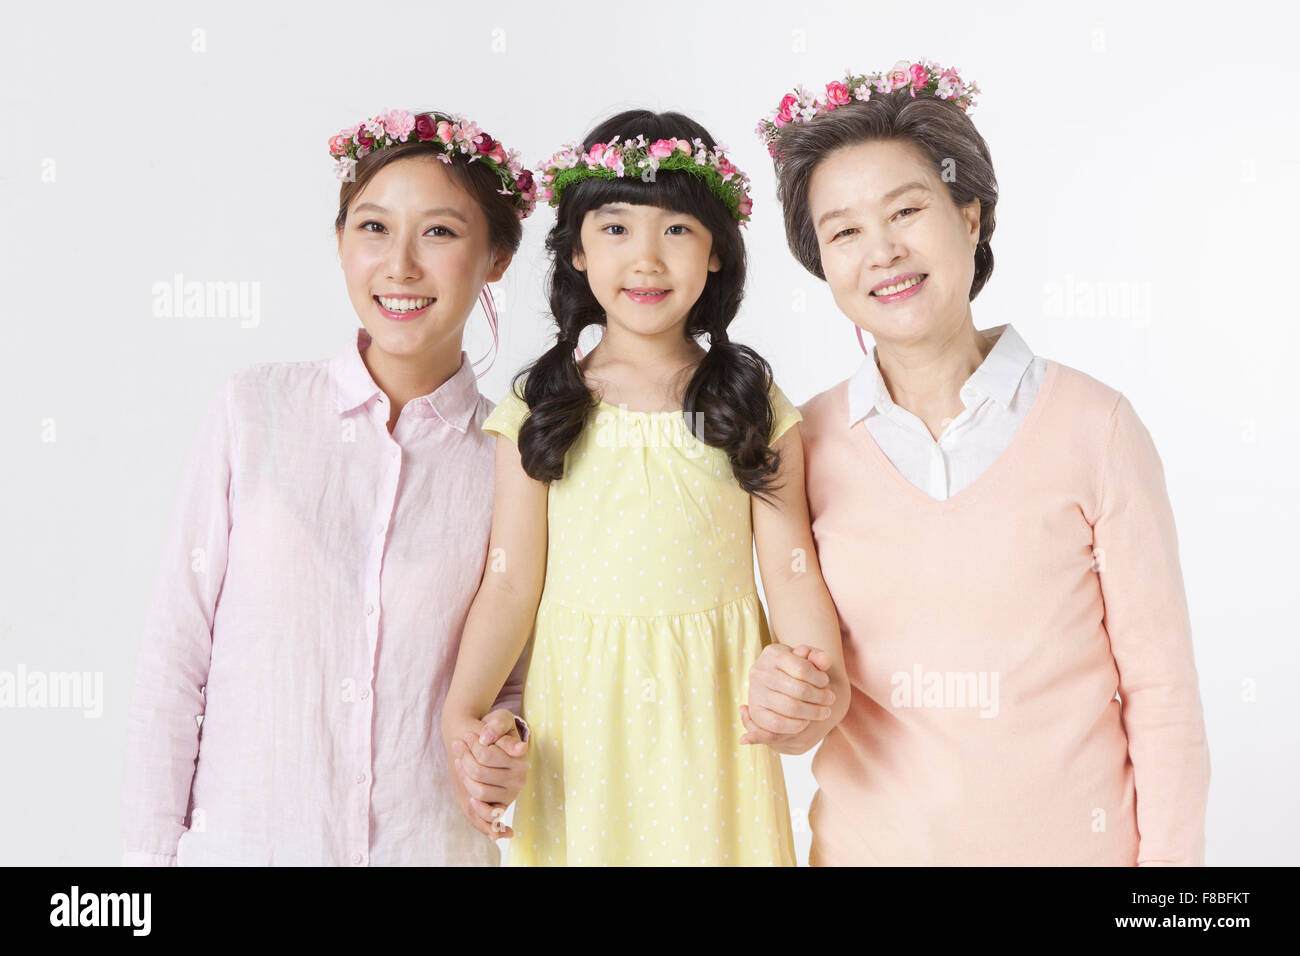 Young girl, young adult woman, senior woman together all wearing flower crowns and staring forward with a smile with their Stock Photo